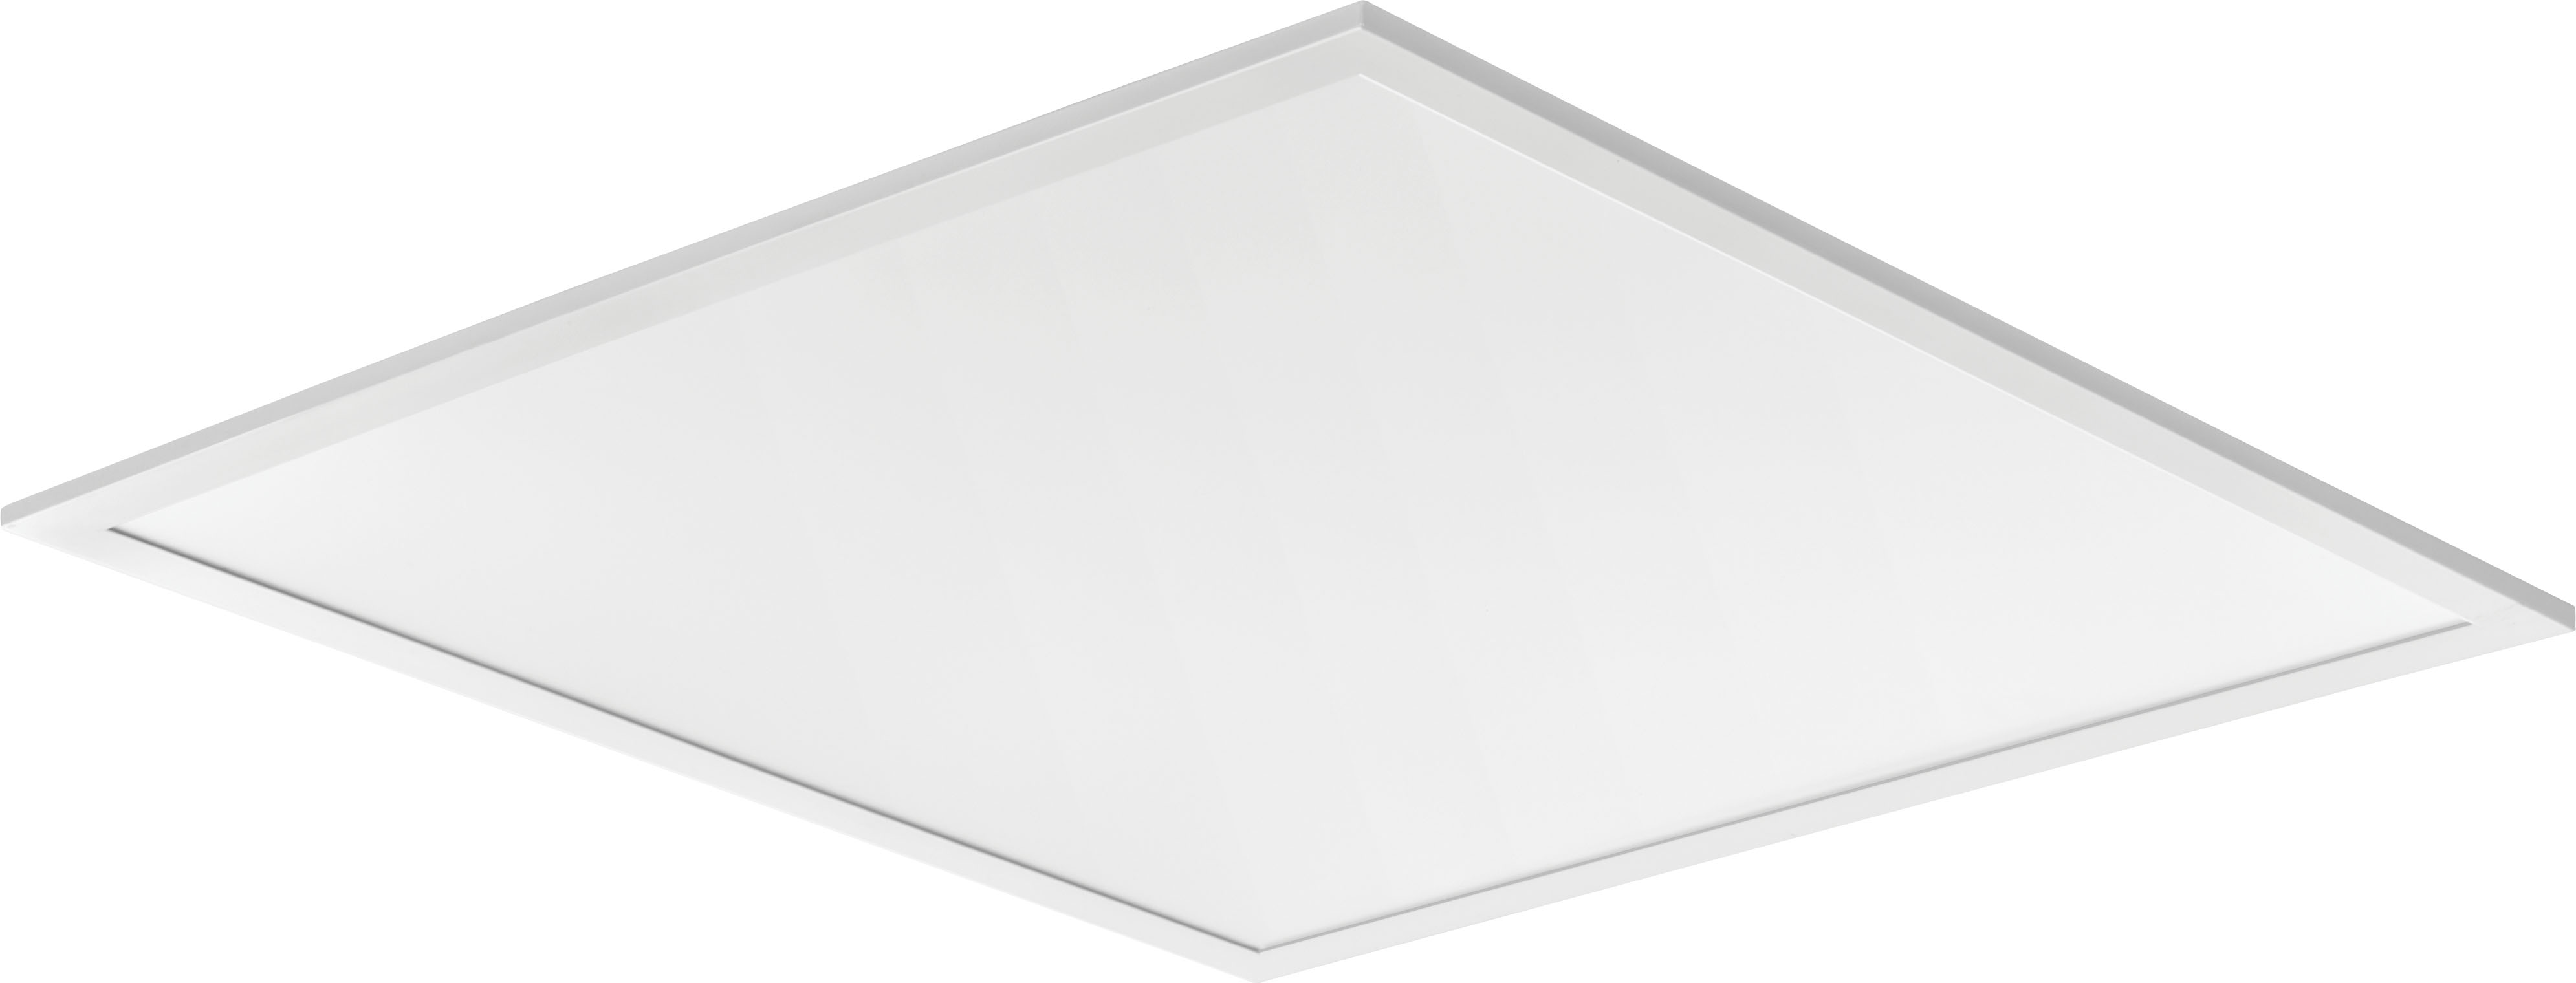 Contractor Select Cpx Led Flat Panel